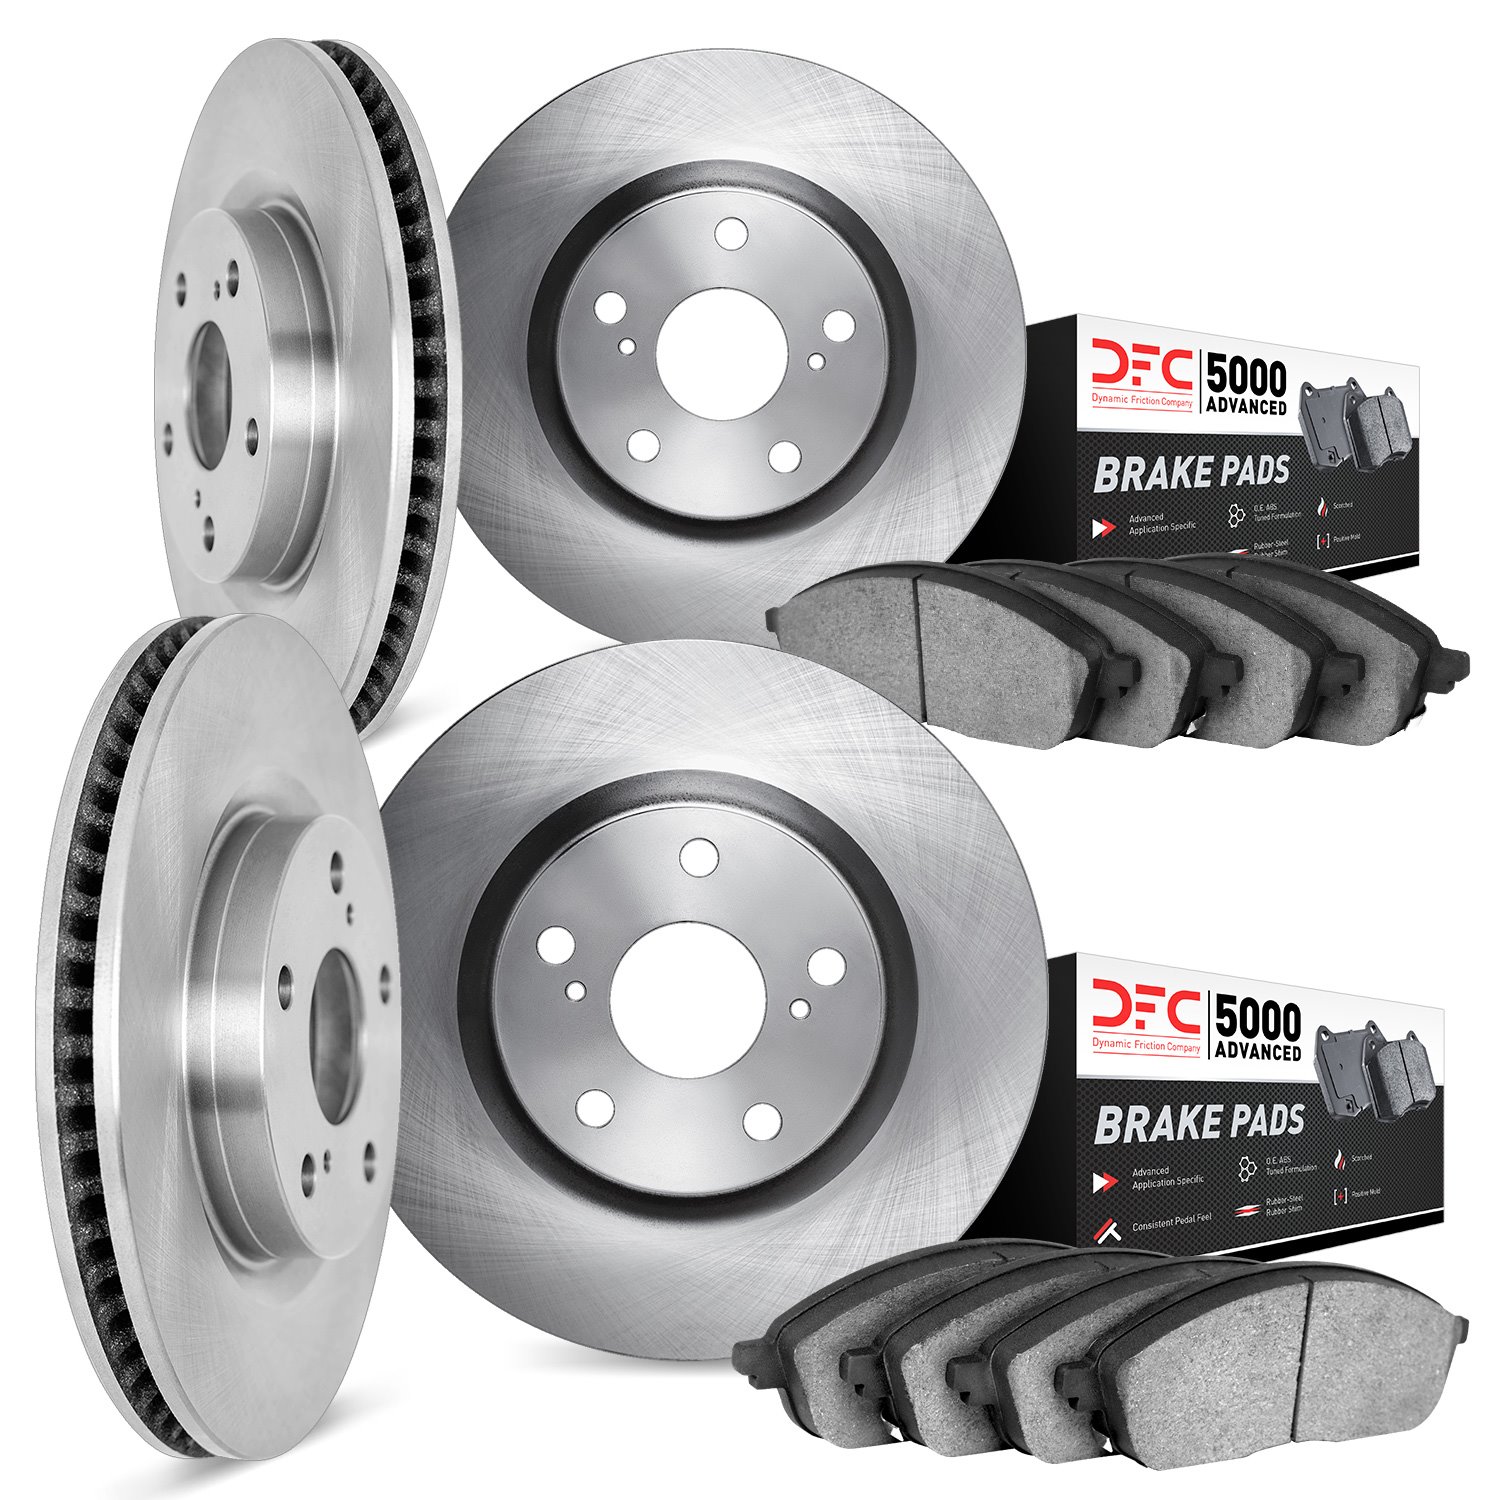 6504-73040 Brake Rotors w/5000 Advanced Brake Pads Kit, Fits Select Audi/Volkswagen, Position: Front and Rear